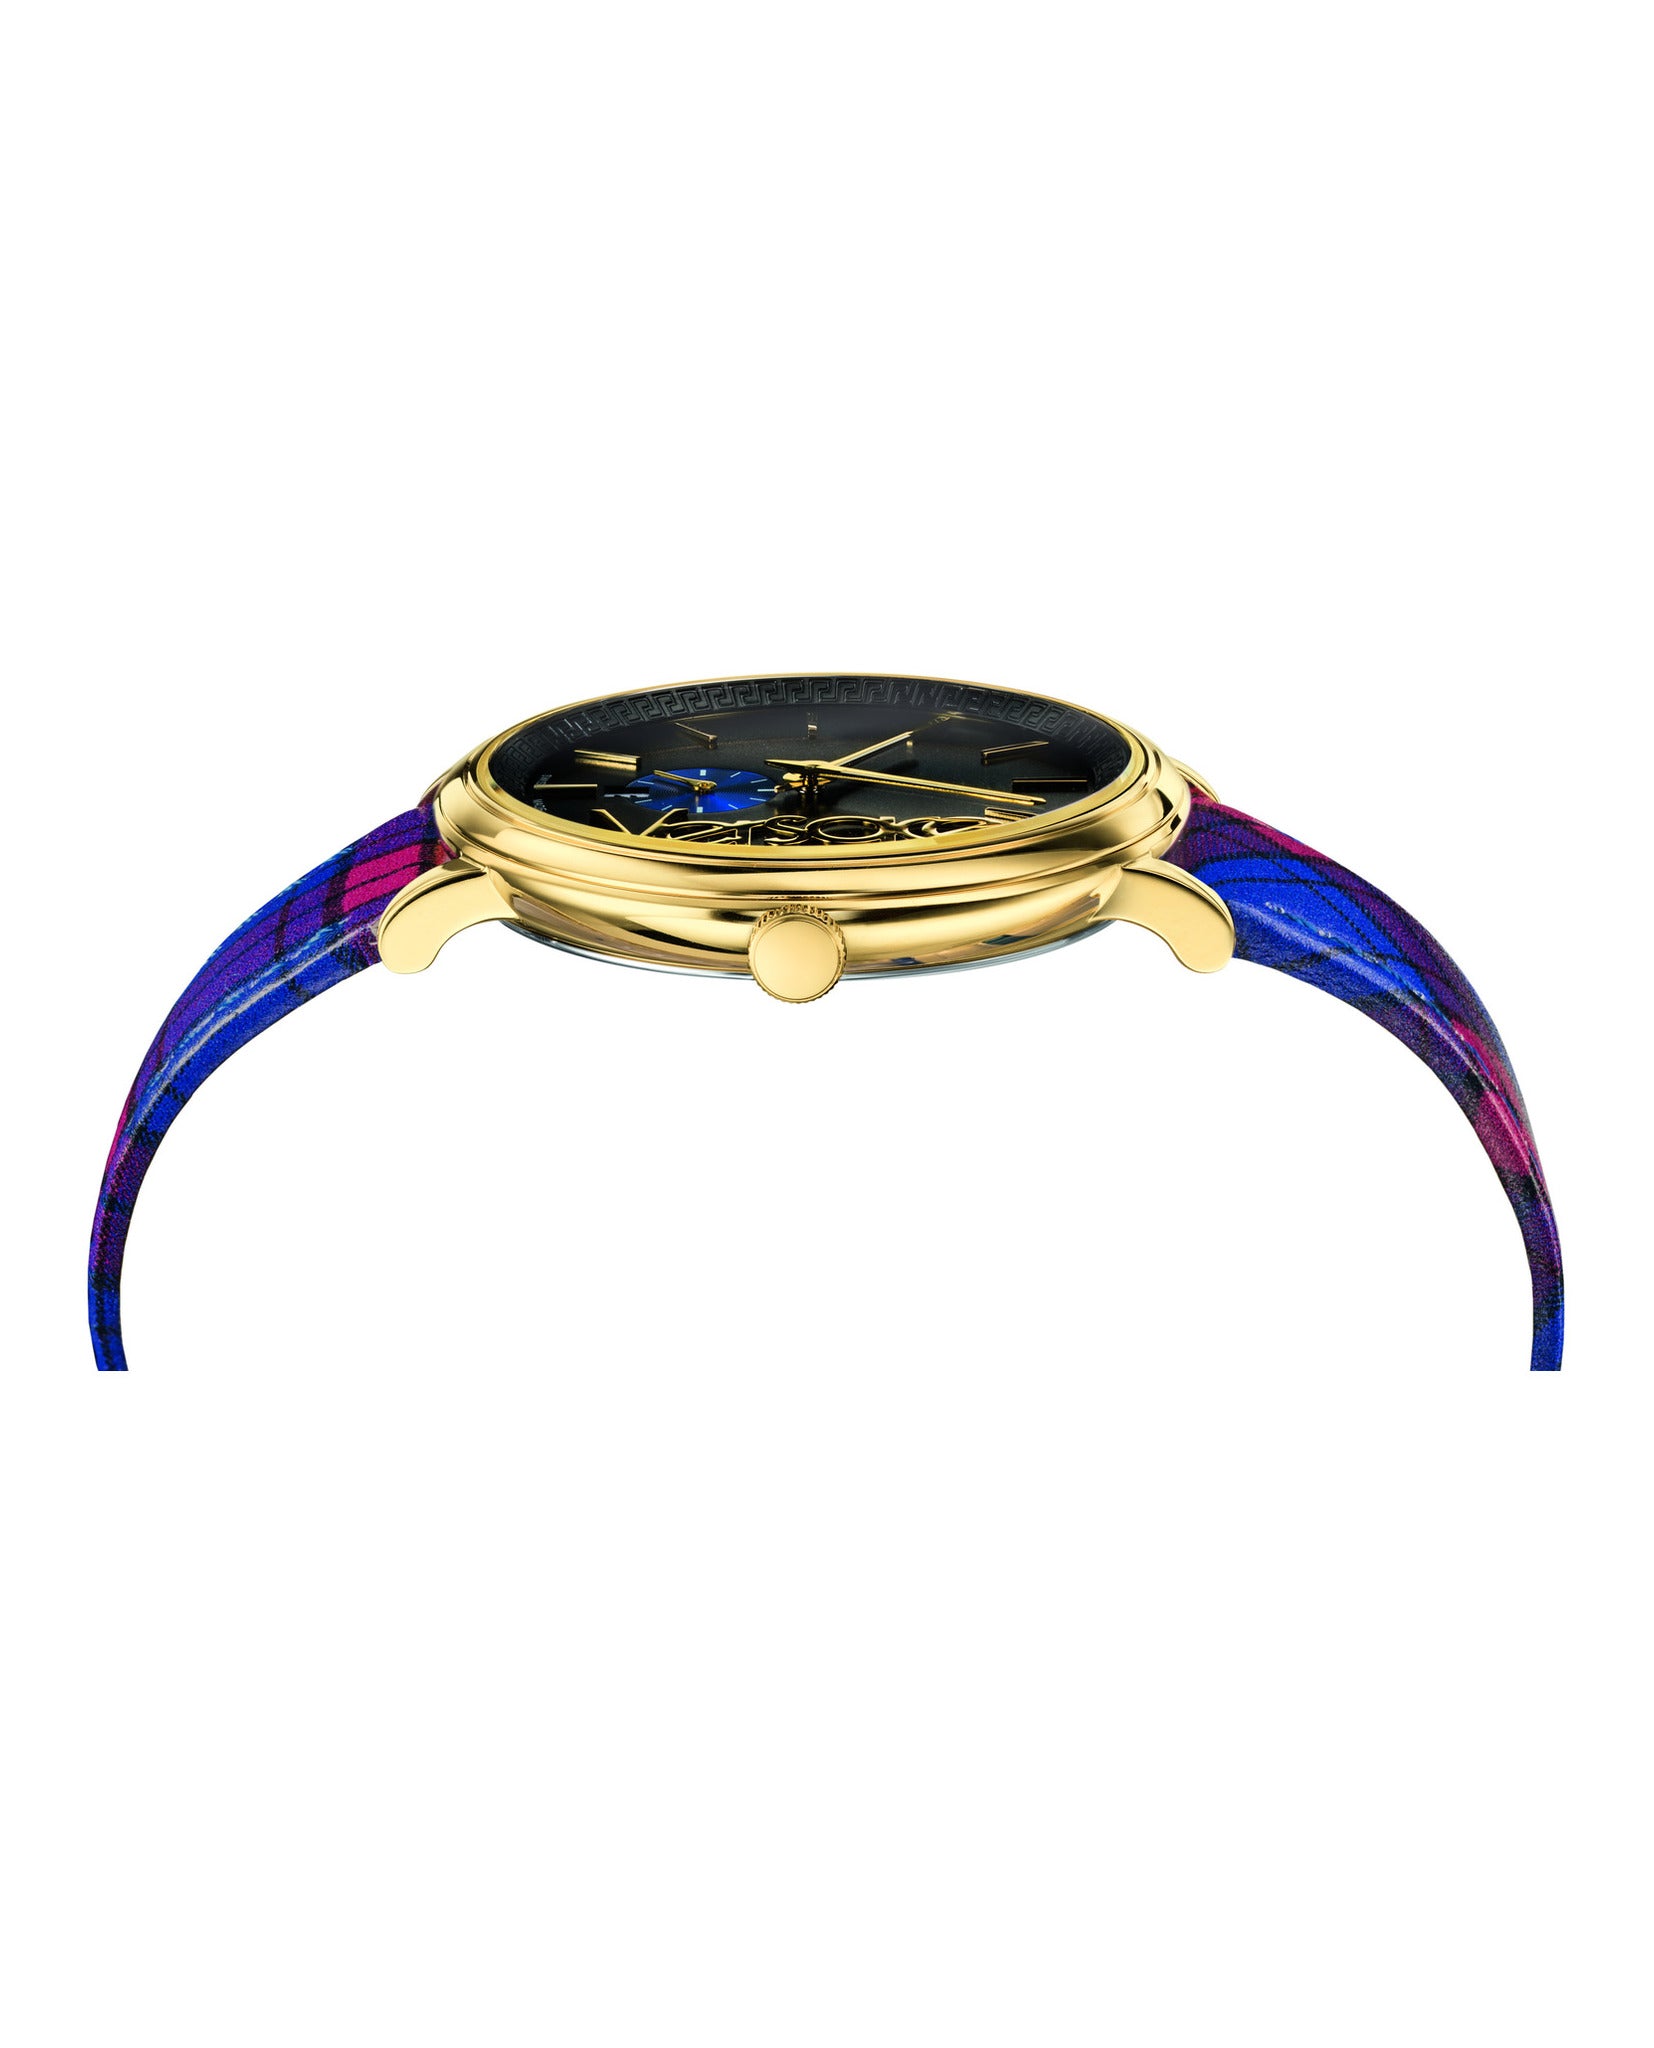 V-Circle - The Clans Edition Watch